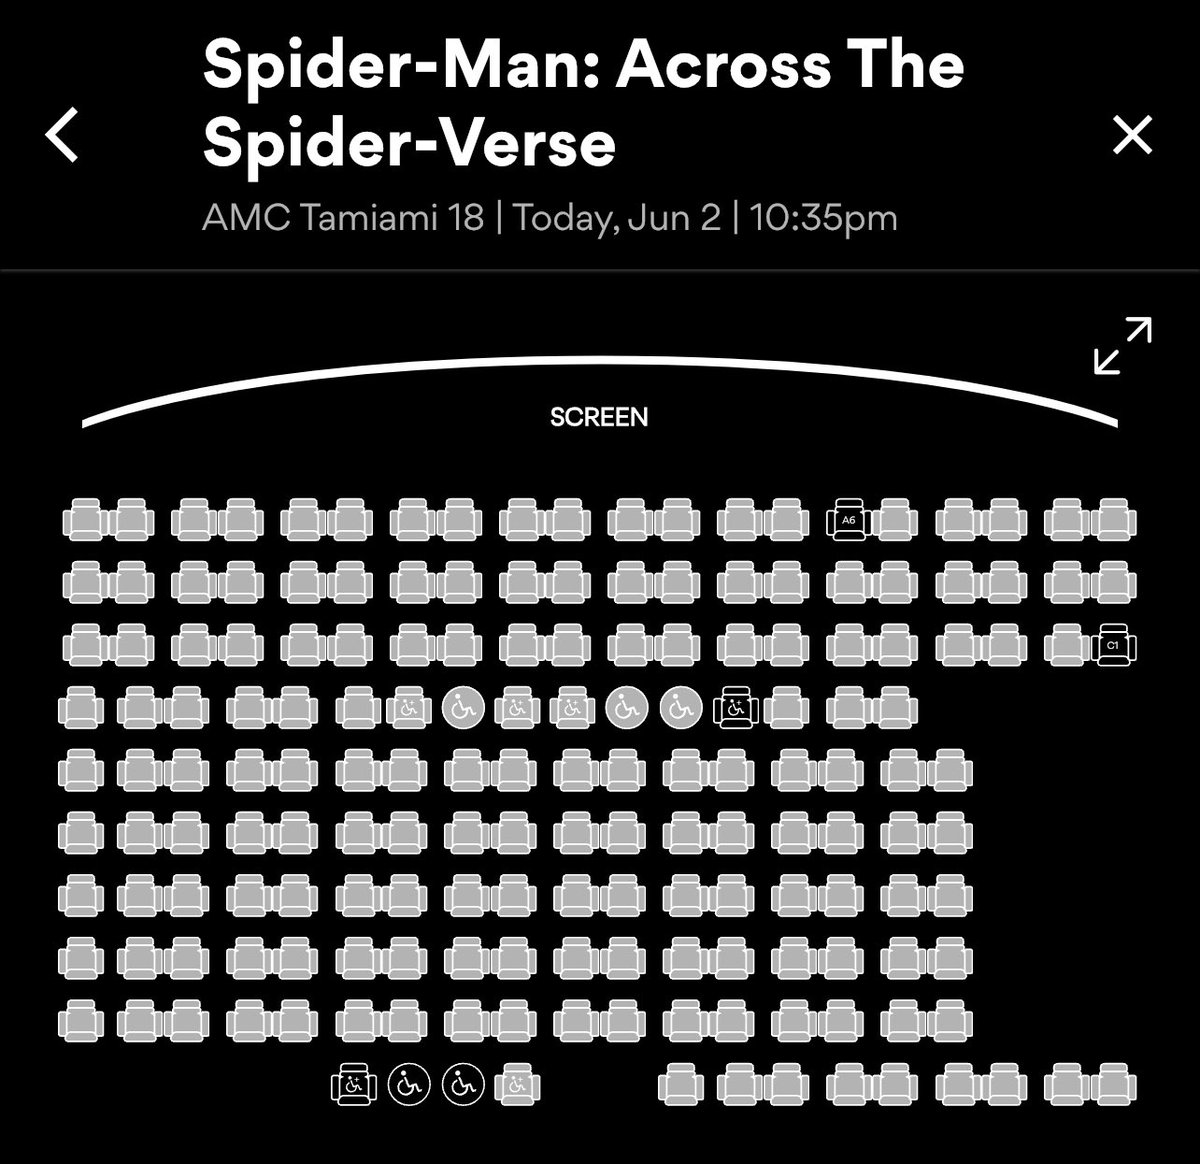 Holy moly…all seats are sold out. 🤩🤩🤩 🦍🦍🦍🦍 ##AMCARMY #SpiderManAcrossTheSpiderVerse is going to break big numbers 
#AMCSTRONG